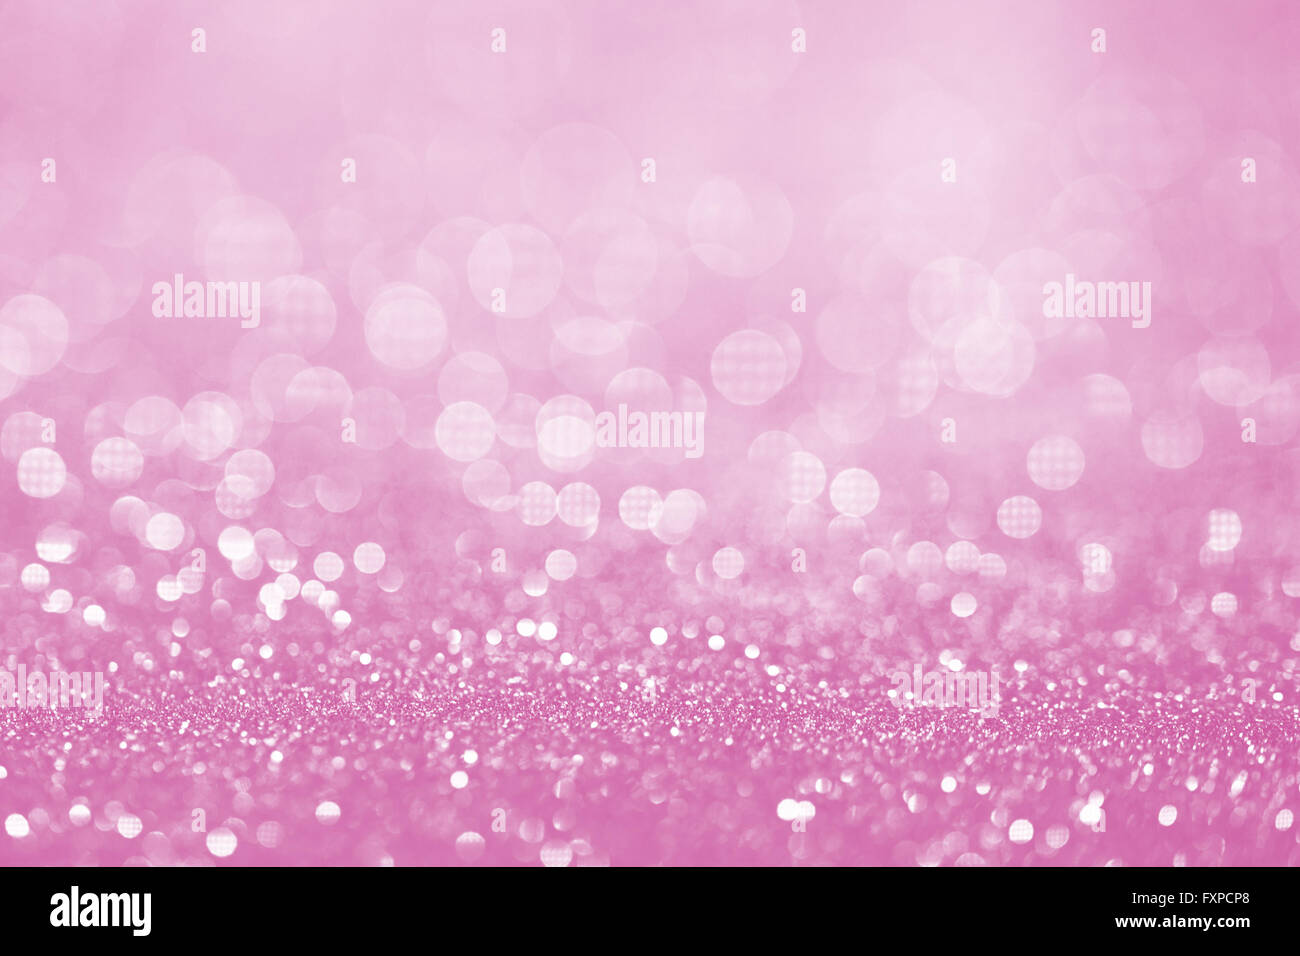 Hot Pink Glitter Background Photos and Images